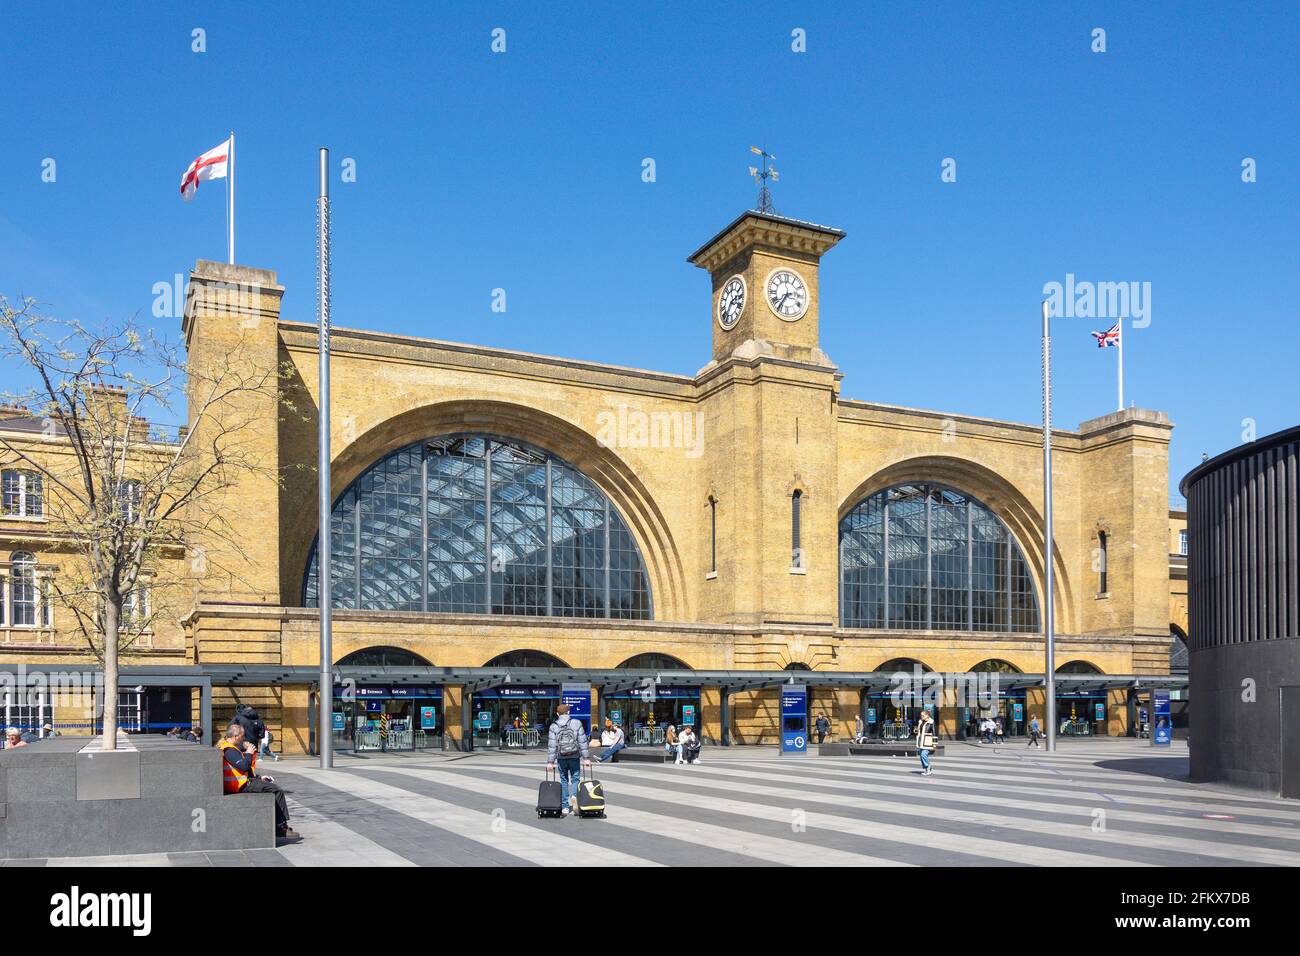 Gare de King's Cross, Euston Road, King's Cross, London Borough of Camden, Greater London, Angleterre, Royaume-Uni Banque D'Images